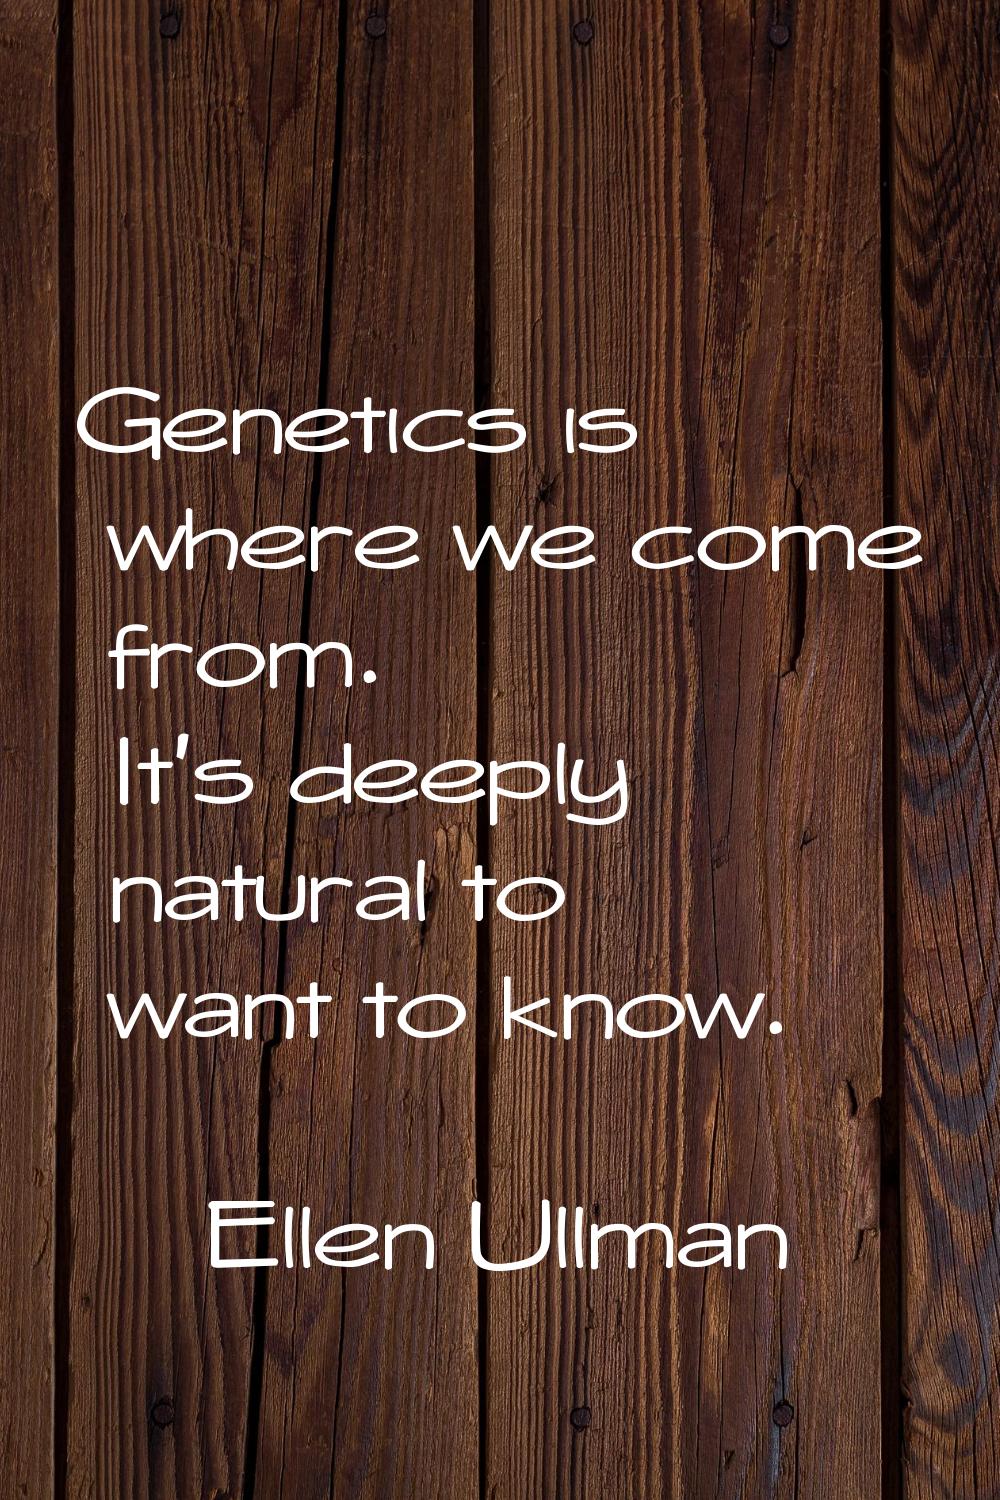 Genetics is where we come from. It's deeply natural to want to know.